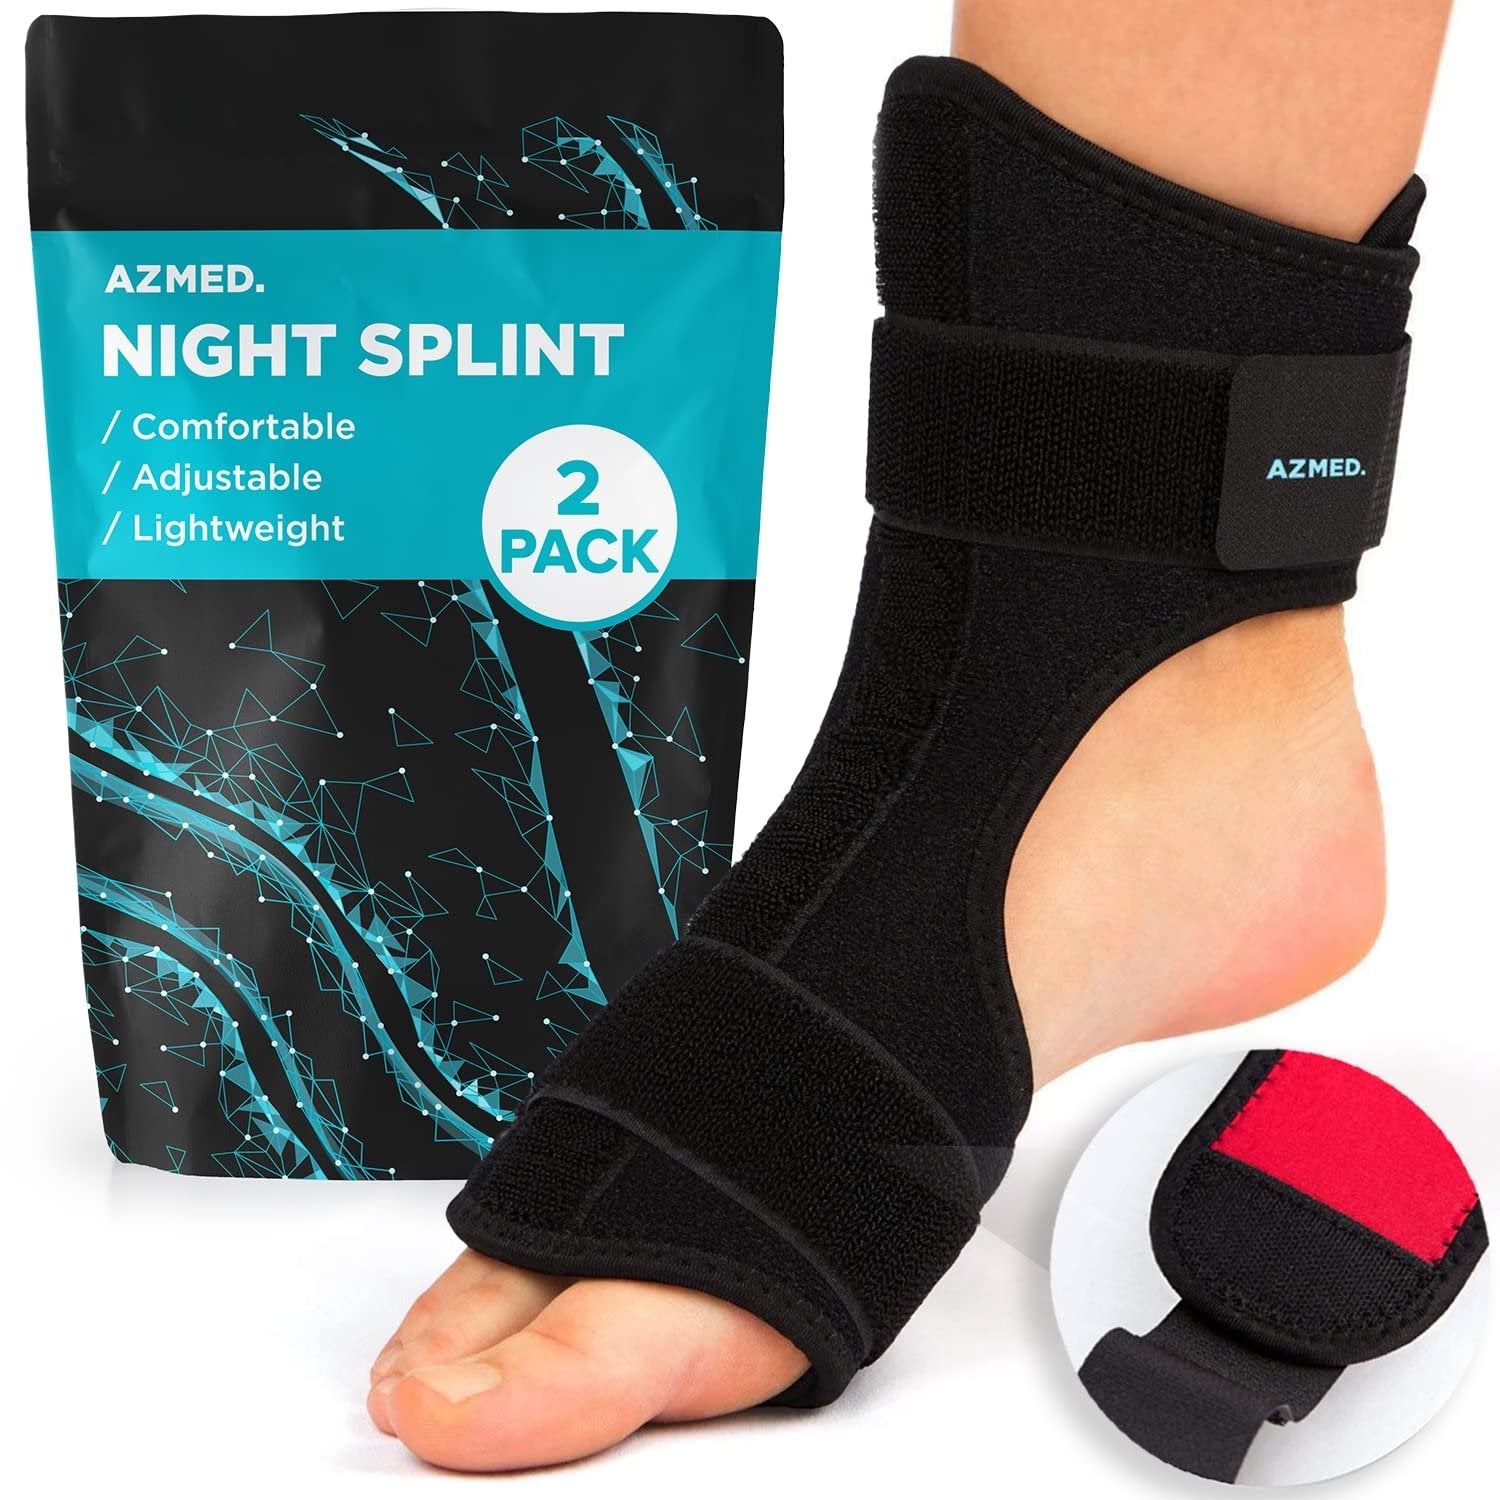 AZMED Plantar Fasciitis Night Splint for Men, Women | Compression Foot Sleeve for Heel, Ankle & Achilles Tendonitis | Adjustable Arch Support Foot Brace for Pain Relief | Light, Breathable